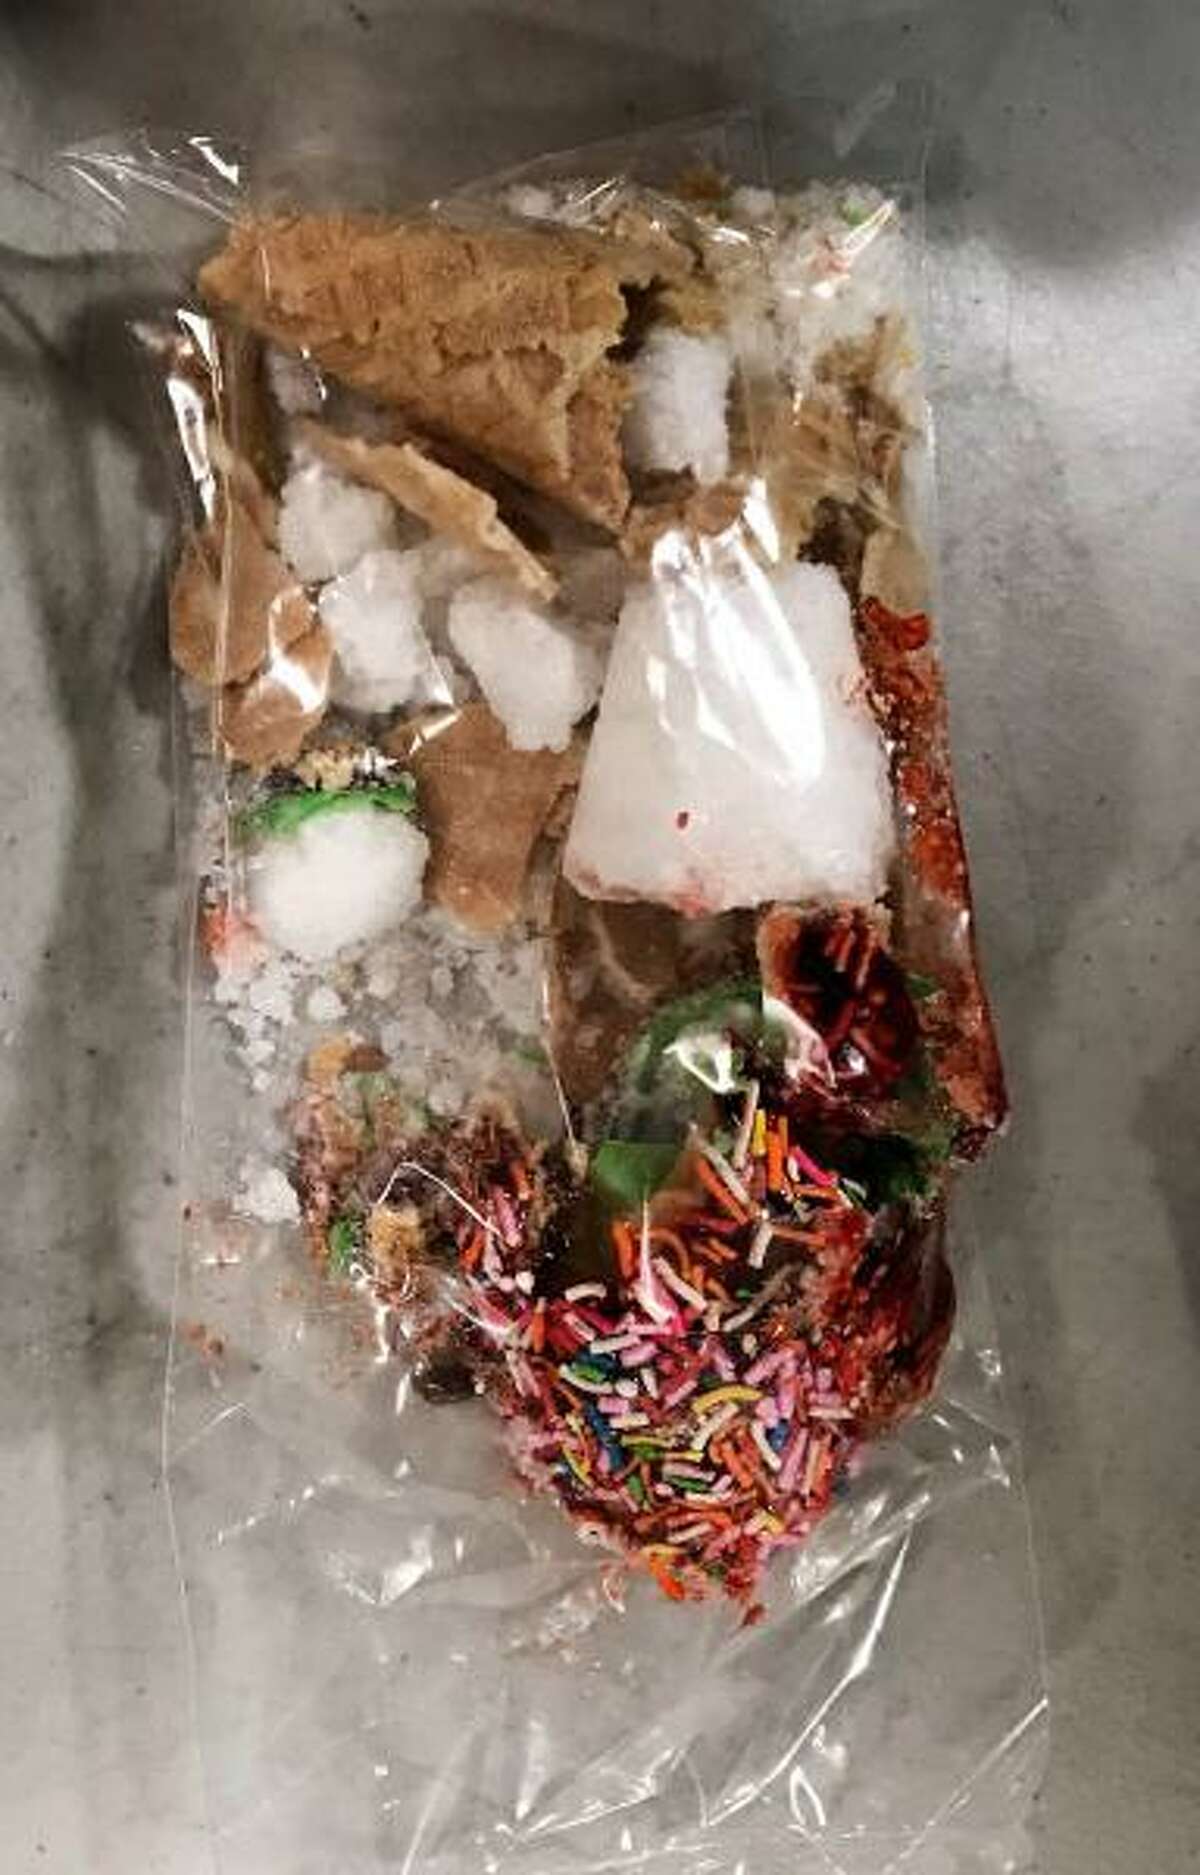 PHOTOS: Drug busts at the Texas-Mexico border  U.S. Customs and Border Protection officers seized 11.7 pounds of meth found tucked inside candy waffle cones last week at a Houston airport.  >>>See more large drug busts at the border 